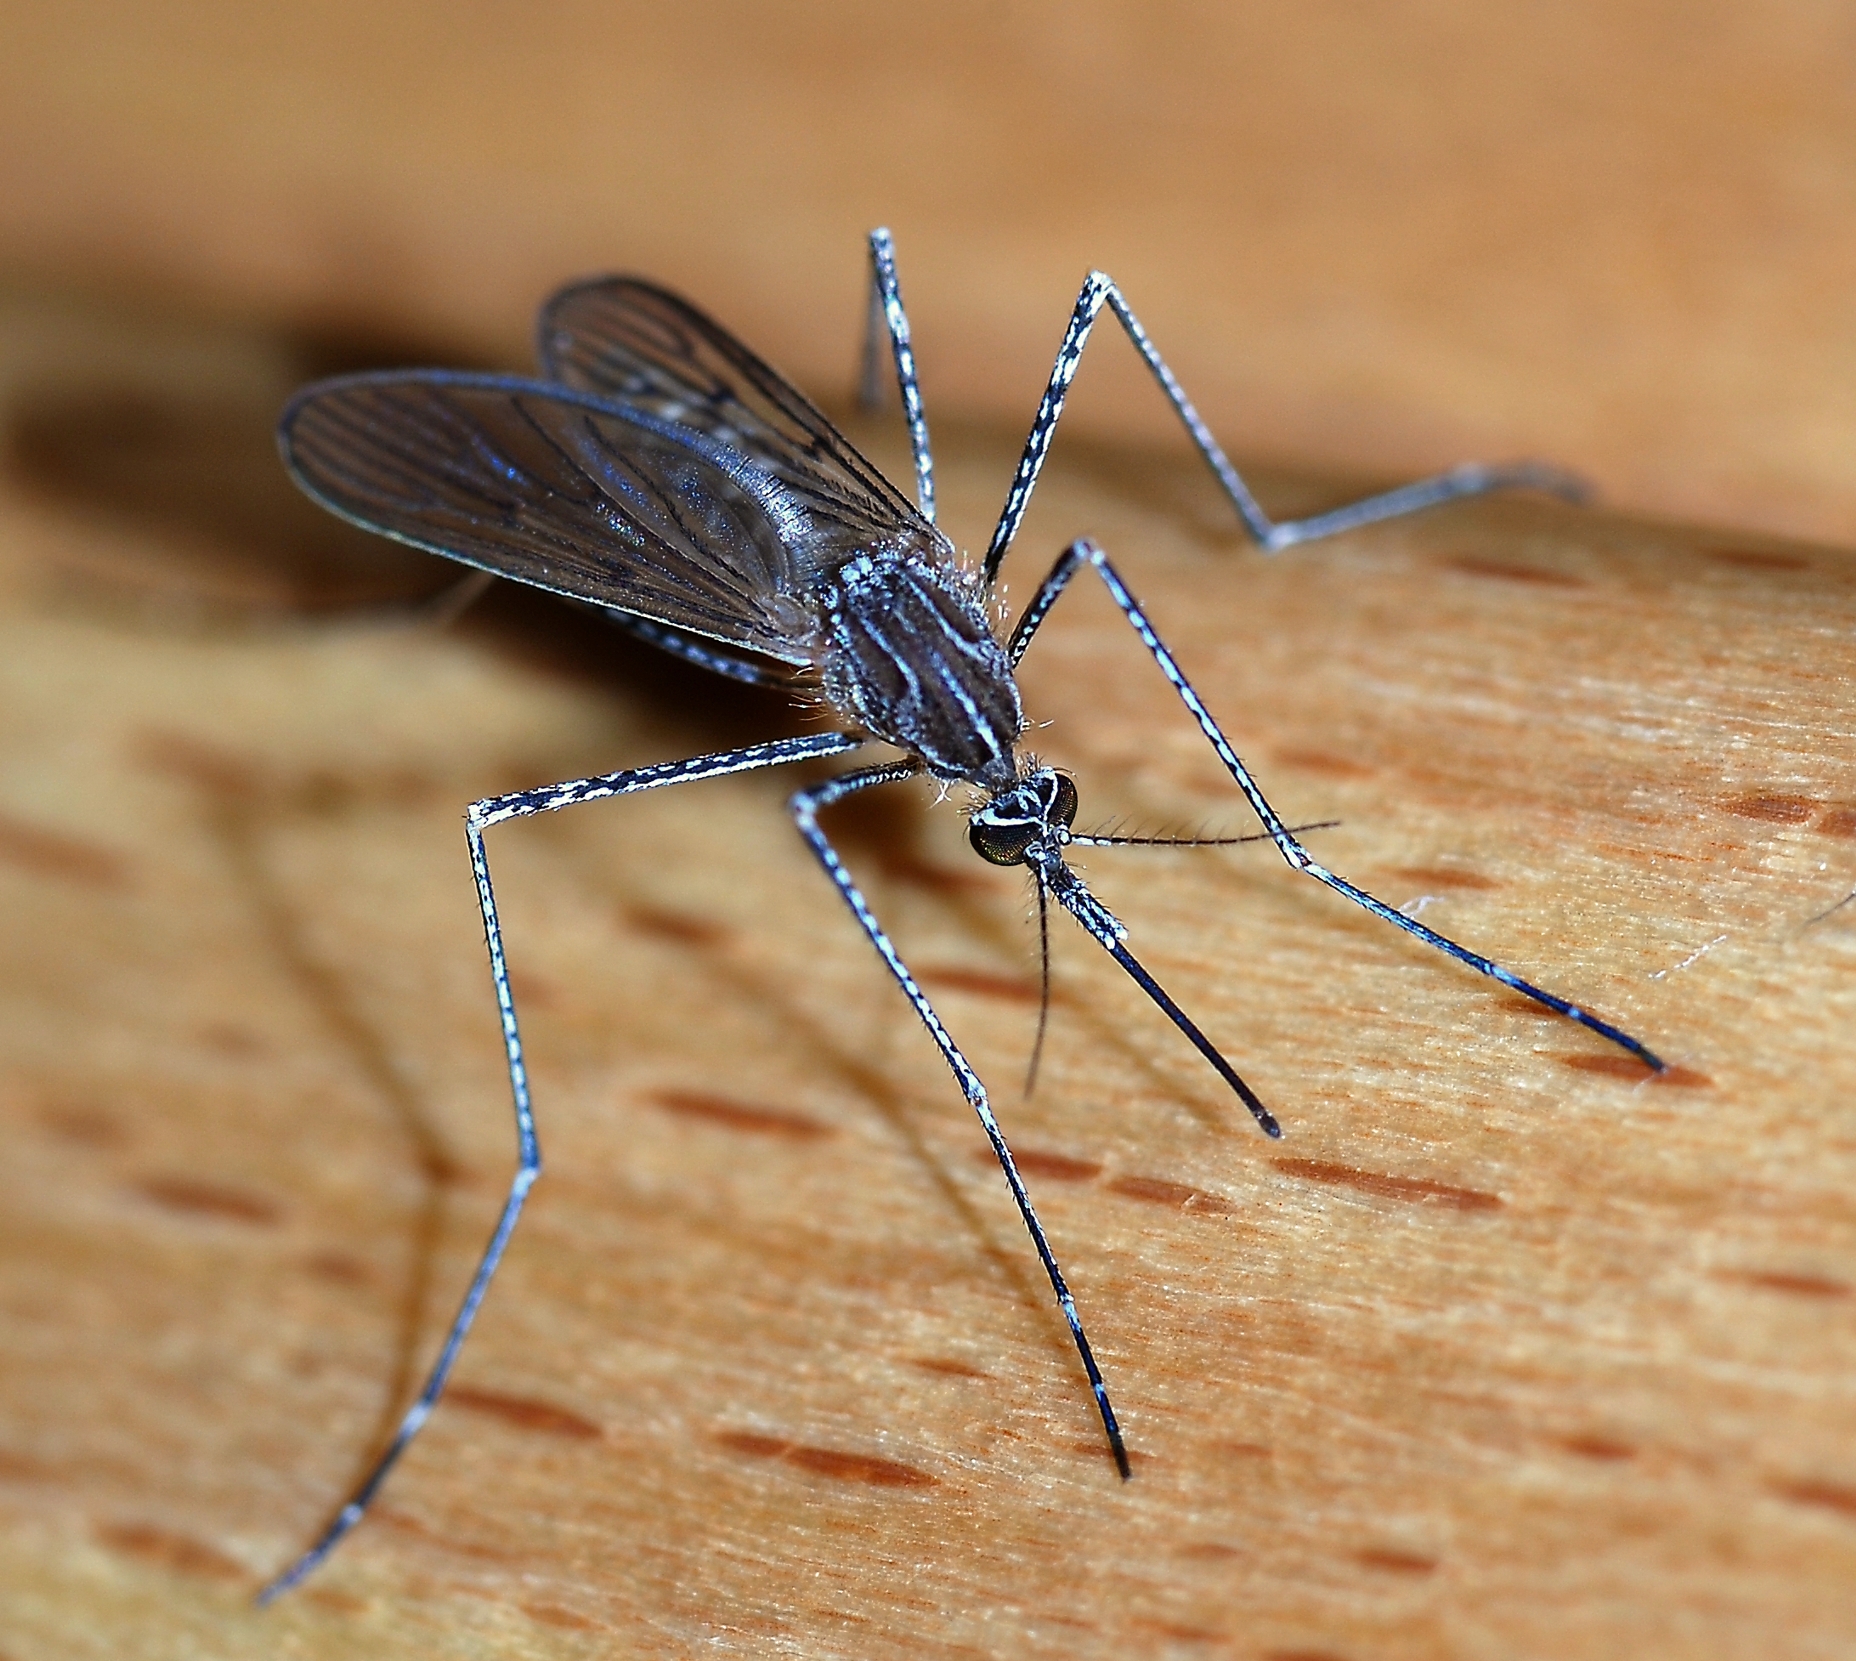 mosquito on a wood surface